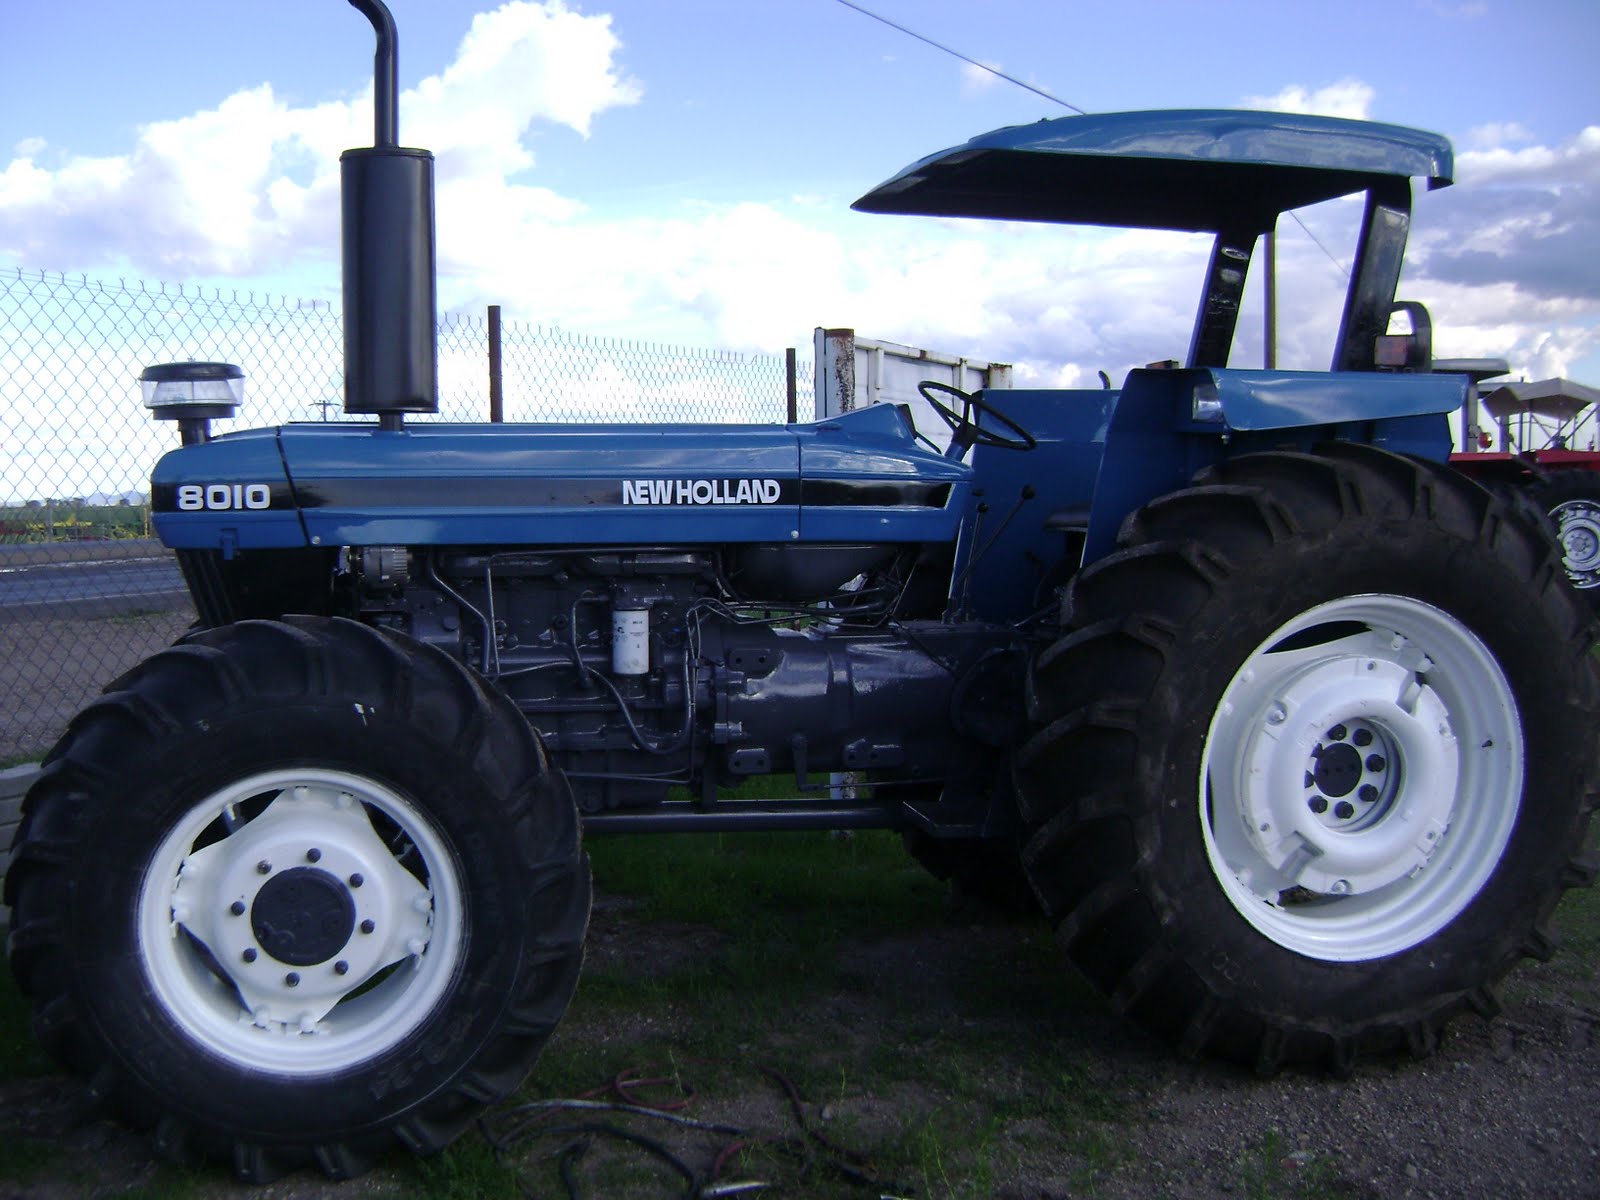 ... AGRICOLA INDUSTRIAL: Tractor Ford NH 8010 por $23000 dlls. (nak2400